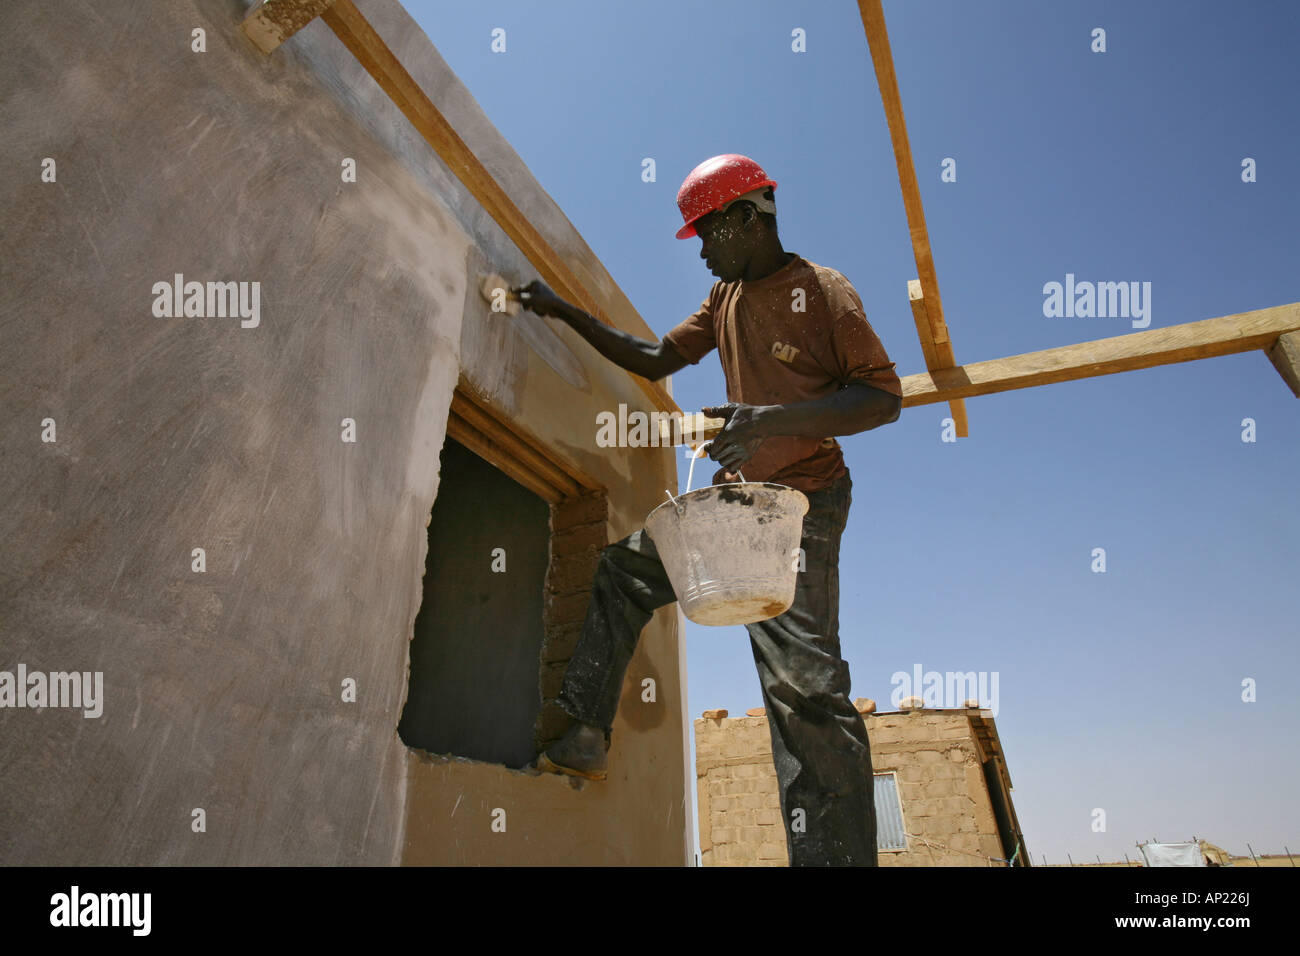 Sudanese labourer paints hospital building of an humanitarian organization in the refugee camp in Bahai Stock Photo